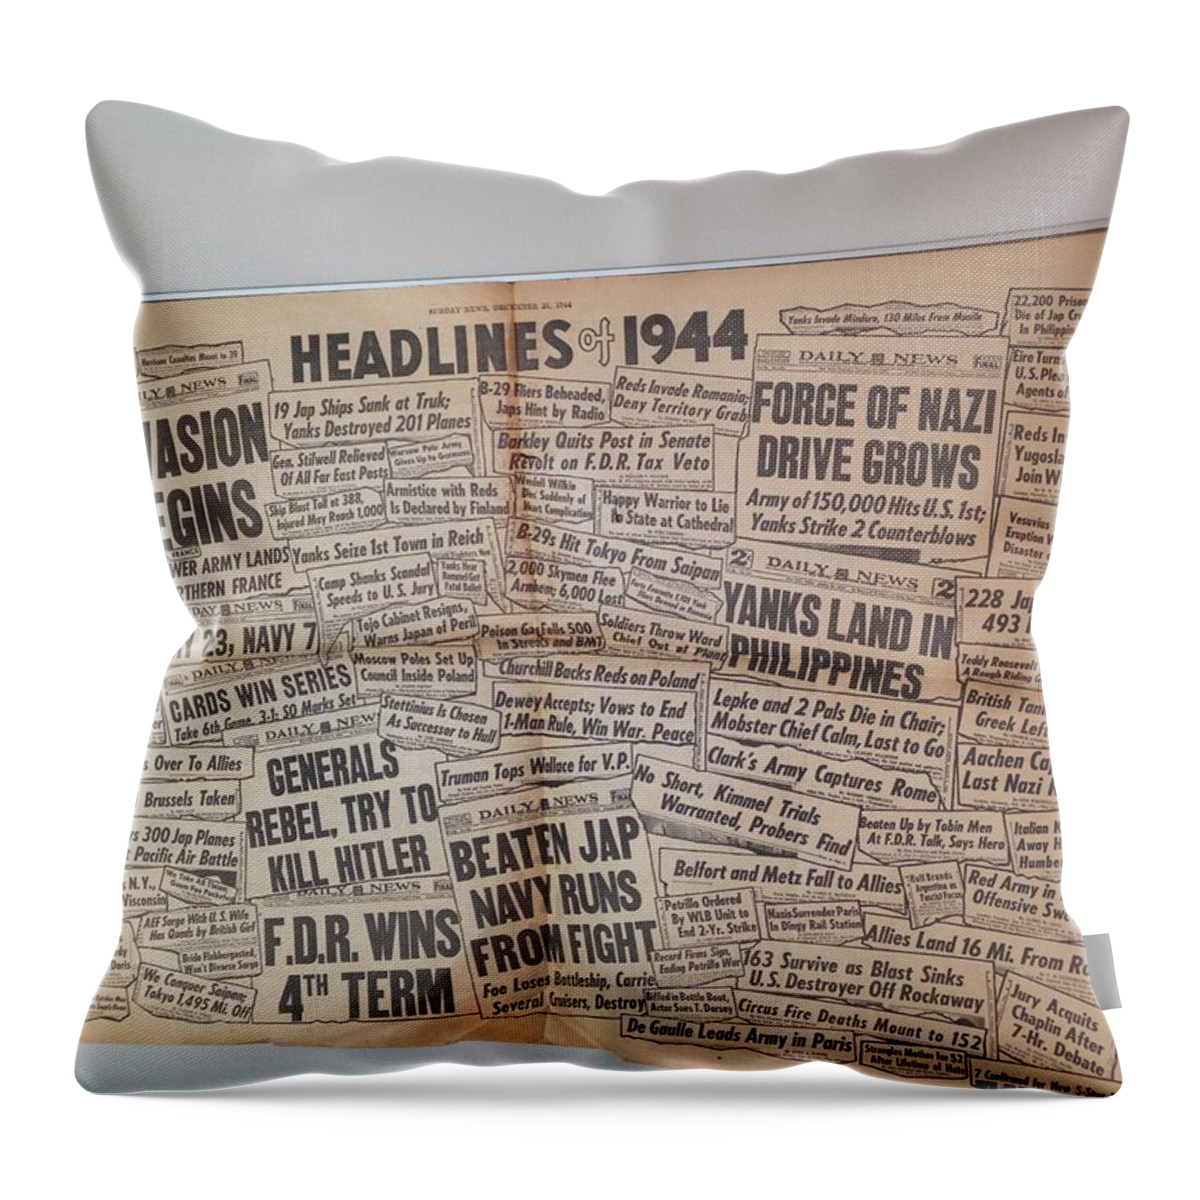 1944 Throw Pillow featuring the photograph 1944 Headlines by Marty Klar